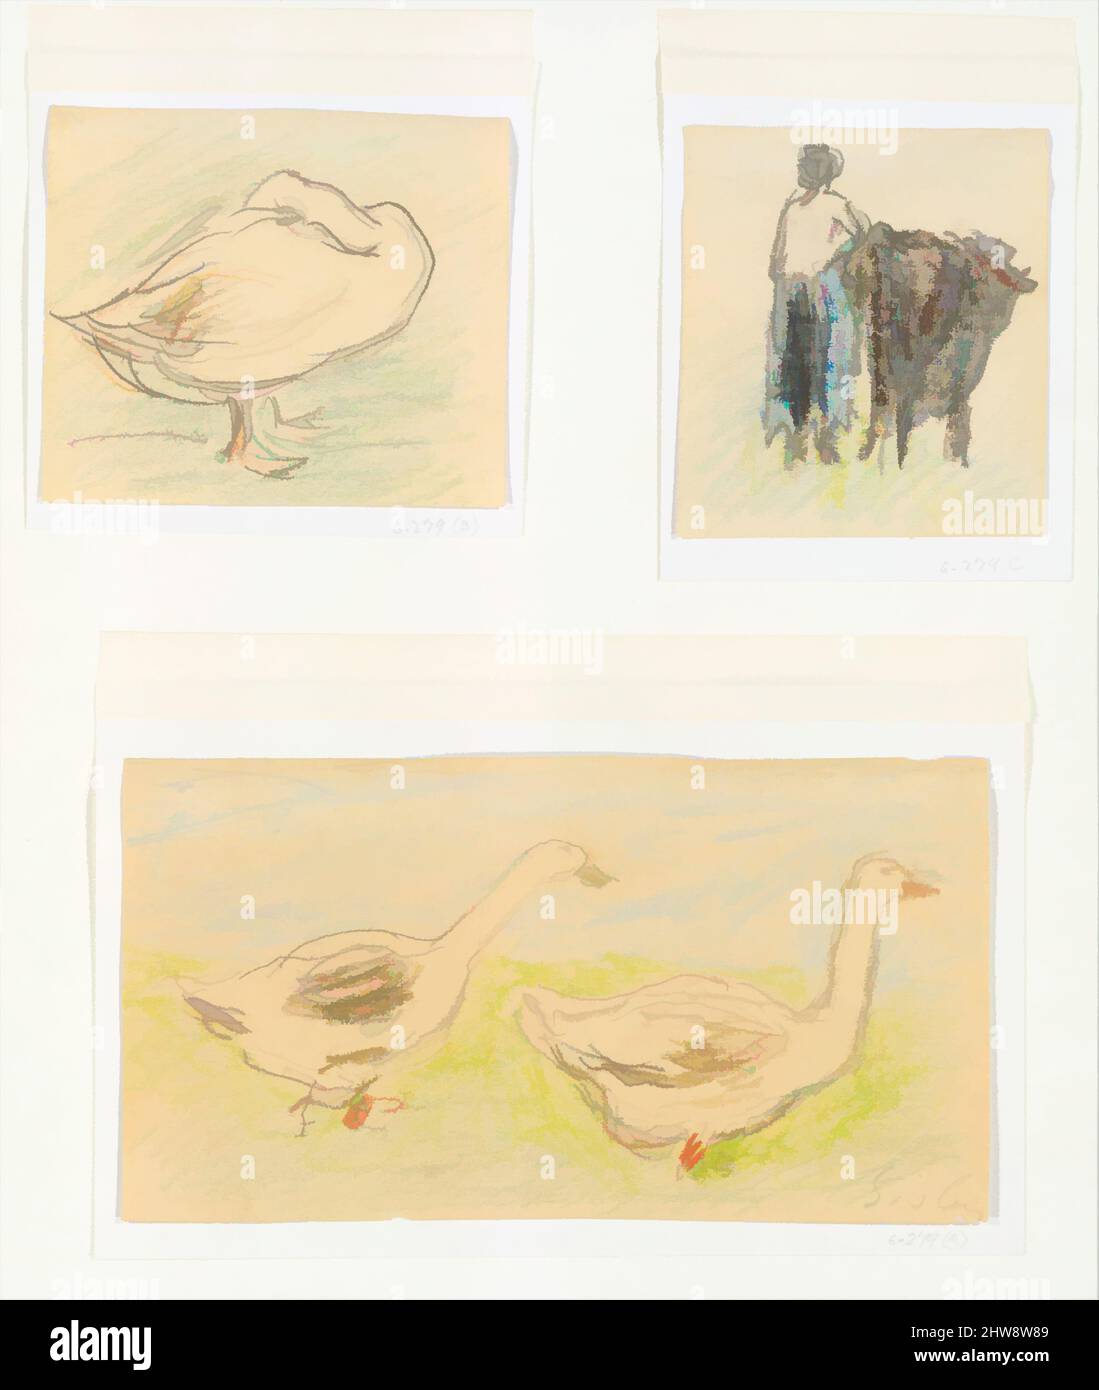 Art inspired by Three Sketches-Two Geese Walking; Peasant Woman with a Cow; Goose Hiding its Head, 1895–97, Three separate sheets of varying sizes, with the same mediums and supports: graphite and colored crayon on buff wove paper, darkened, 2 3/4 x 5 1/8 in. (7 x 13 cm); 2 7/16 x 2 3/, Classic works modernized by Artotop with a splash of modernity. Shapes, color and value, eye-catching visual impact on art. Emotions through freedom of artworks in a contemporary way. A timeless message pursuing a wildly creative new direction. Artists turning to the digital medium and creating the Artotop NFT Stock Photo